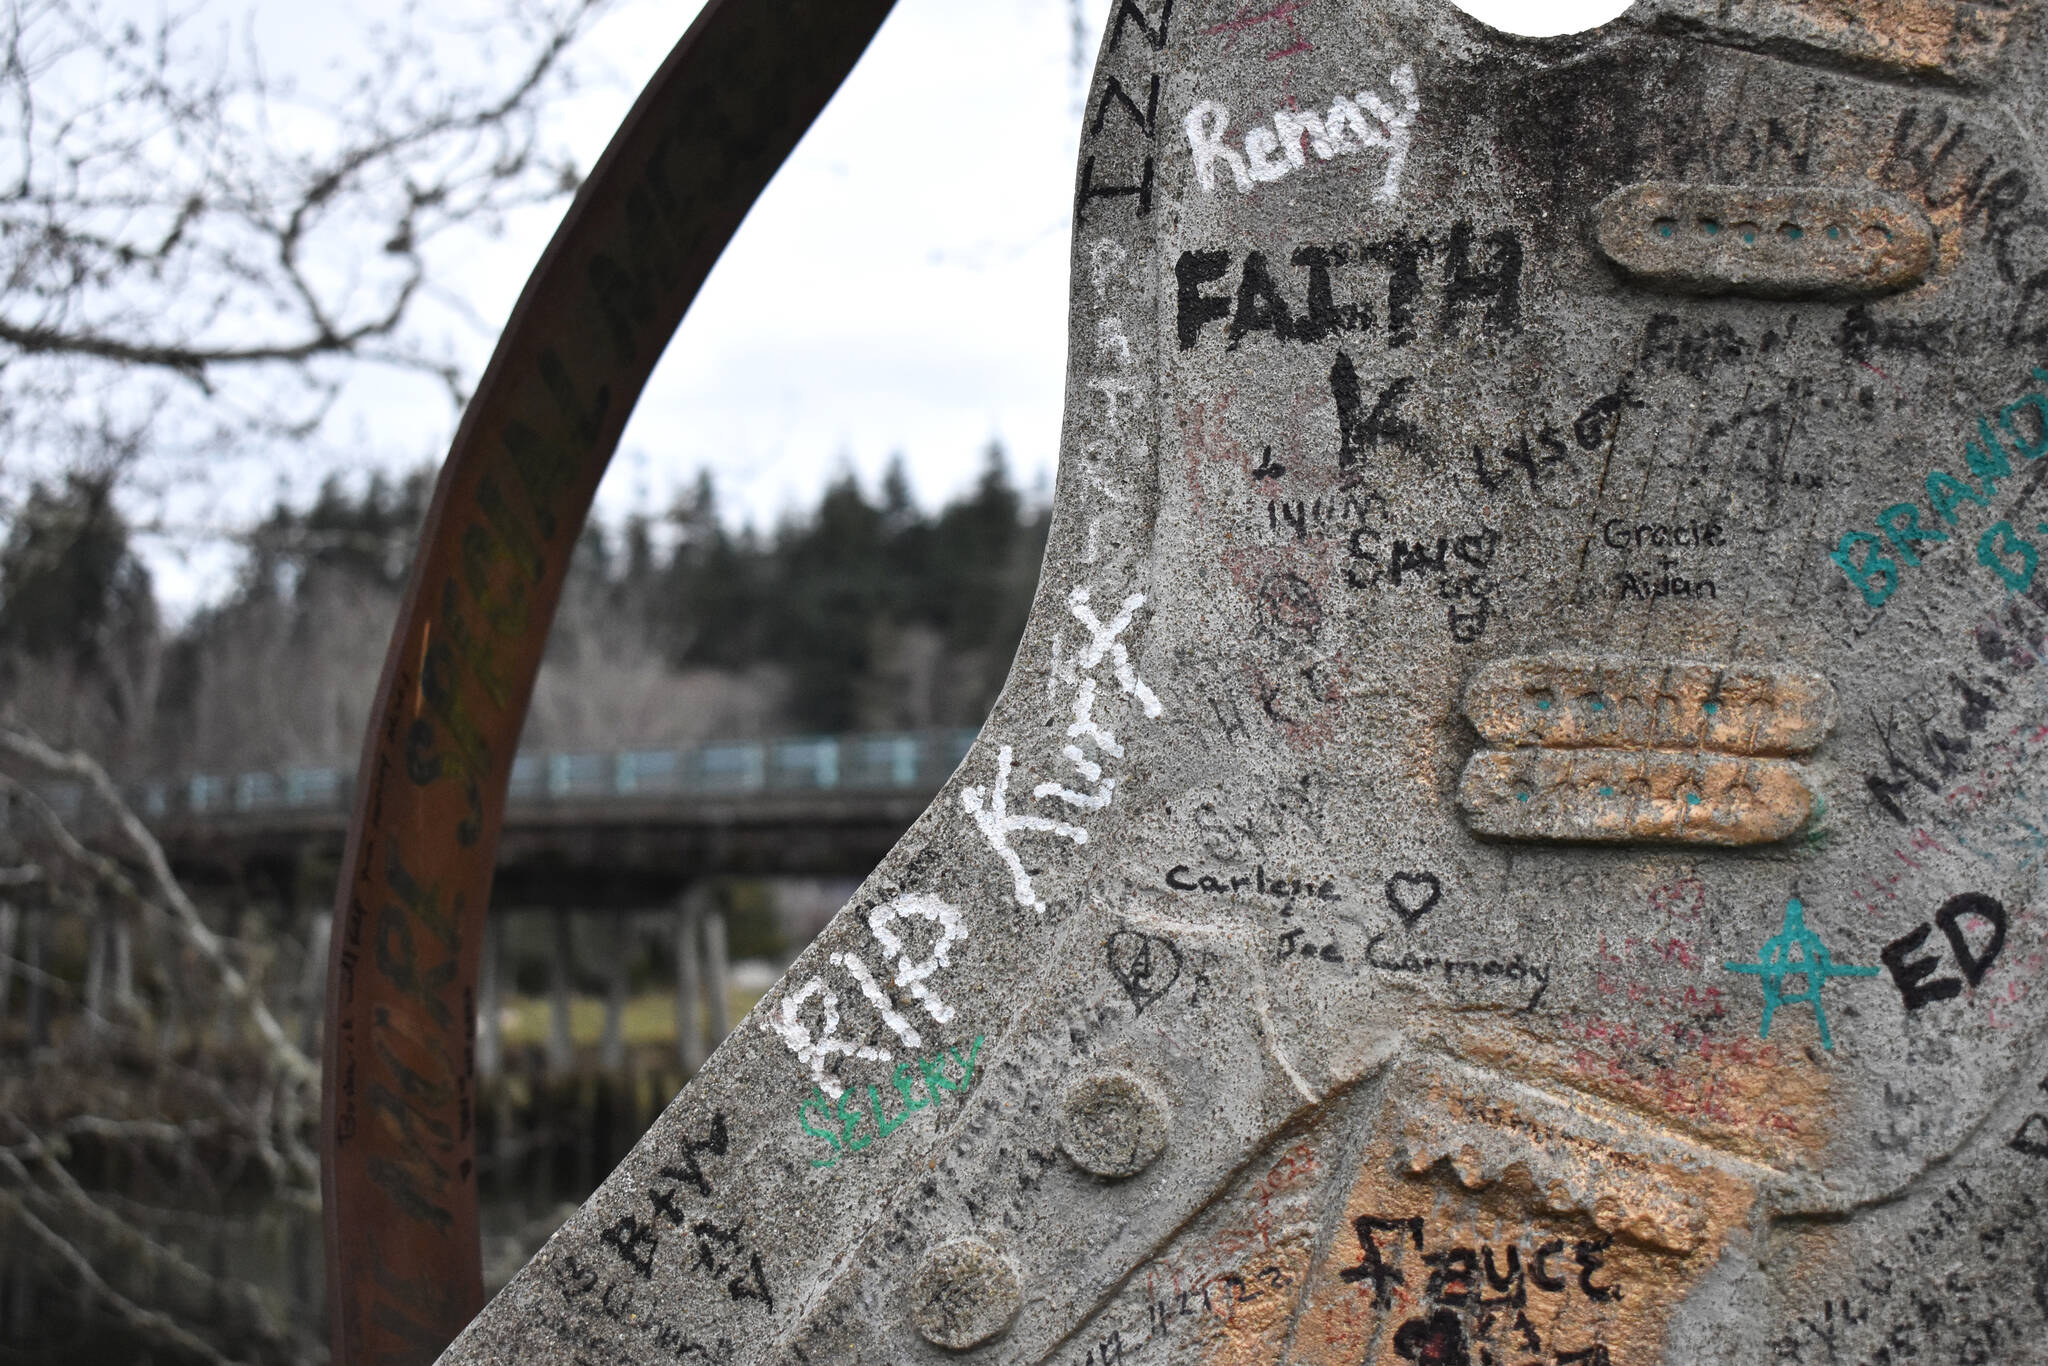 ”RIP Kurt,” is among a large collection of inscriptions that are penned, marked, or spray painted, on the guitar statue at Kurt Cobain Memorial Park, in North Aberdeen. The park, with the bridge seen behind the guitar, sits at the base of the Young Street Bridge. The bridge is slated to come down in the next few years after the city of Aberdeen received $25 million to replace it. (Matthew N. Wells / The Daily World)